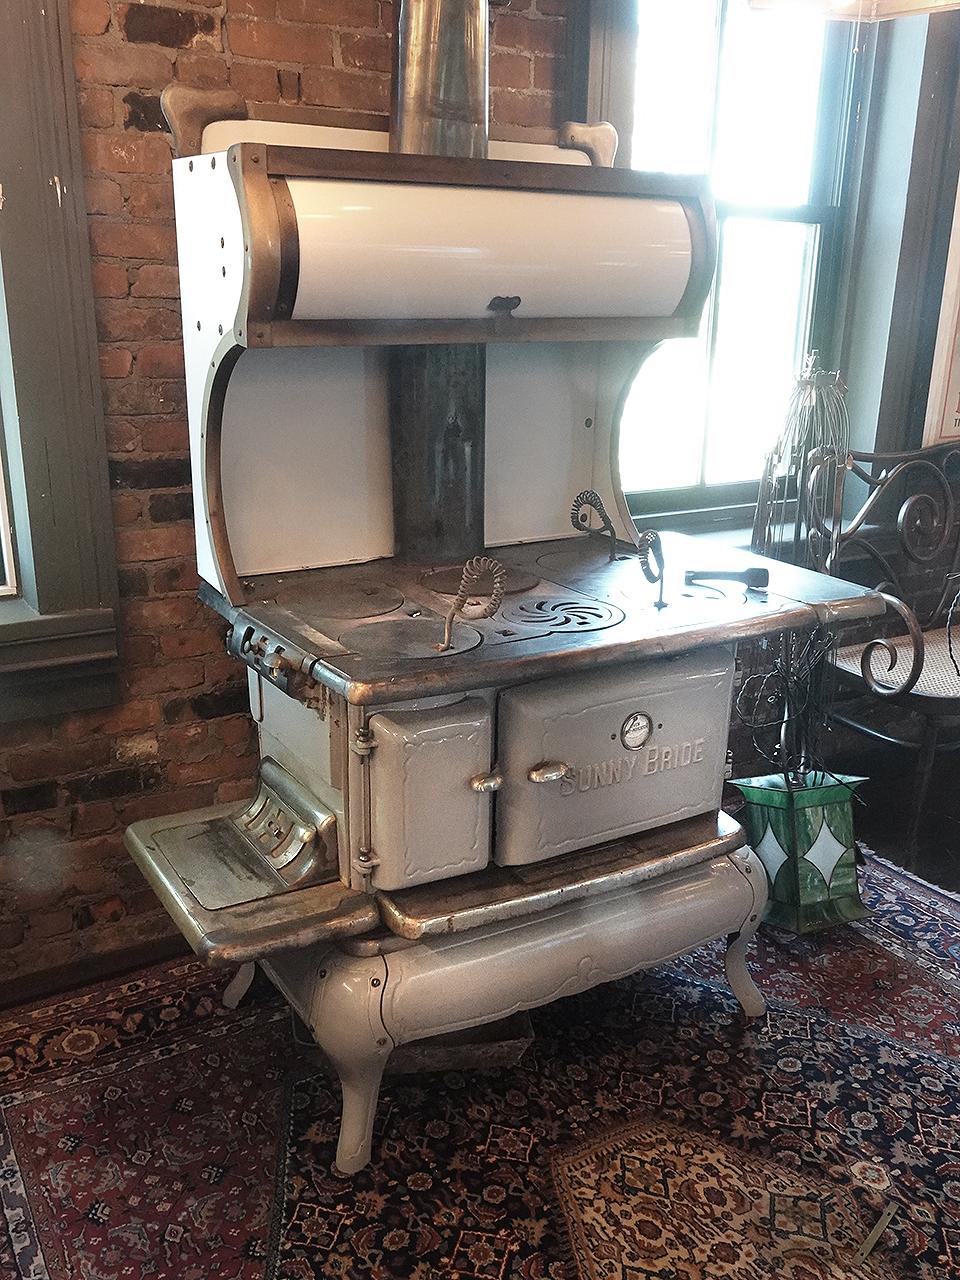 We took this right out of former New York Governor George Pataki's family farm where is sat for well over 100 years. The house was coming down and this original stove needed to be saved. I was told that the stove was in use for almost 70 years.